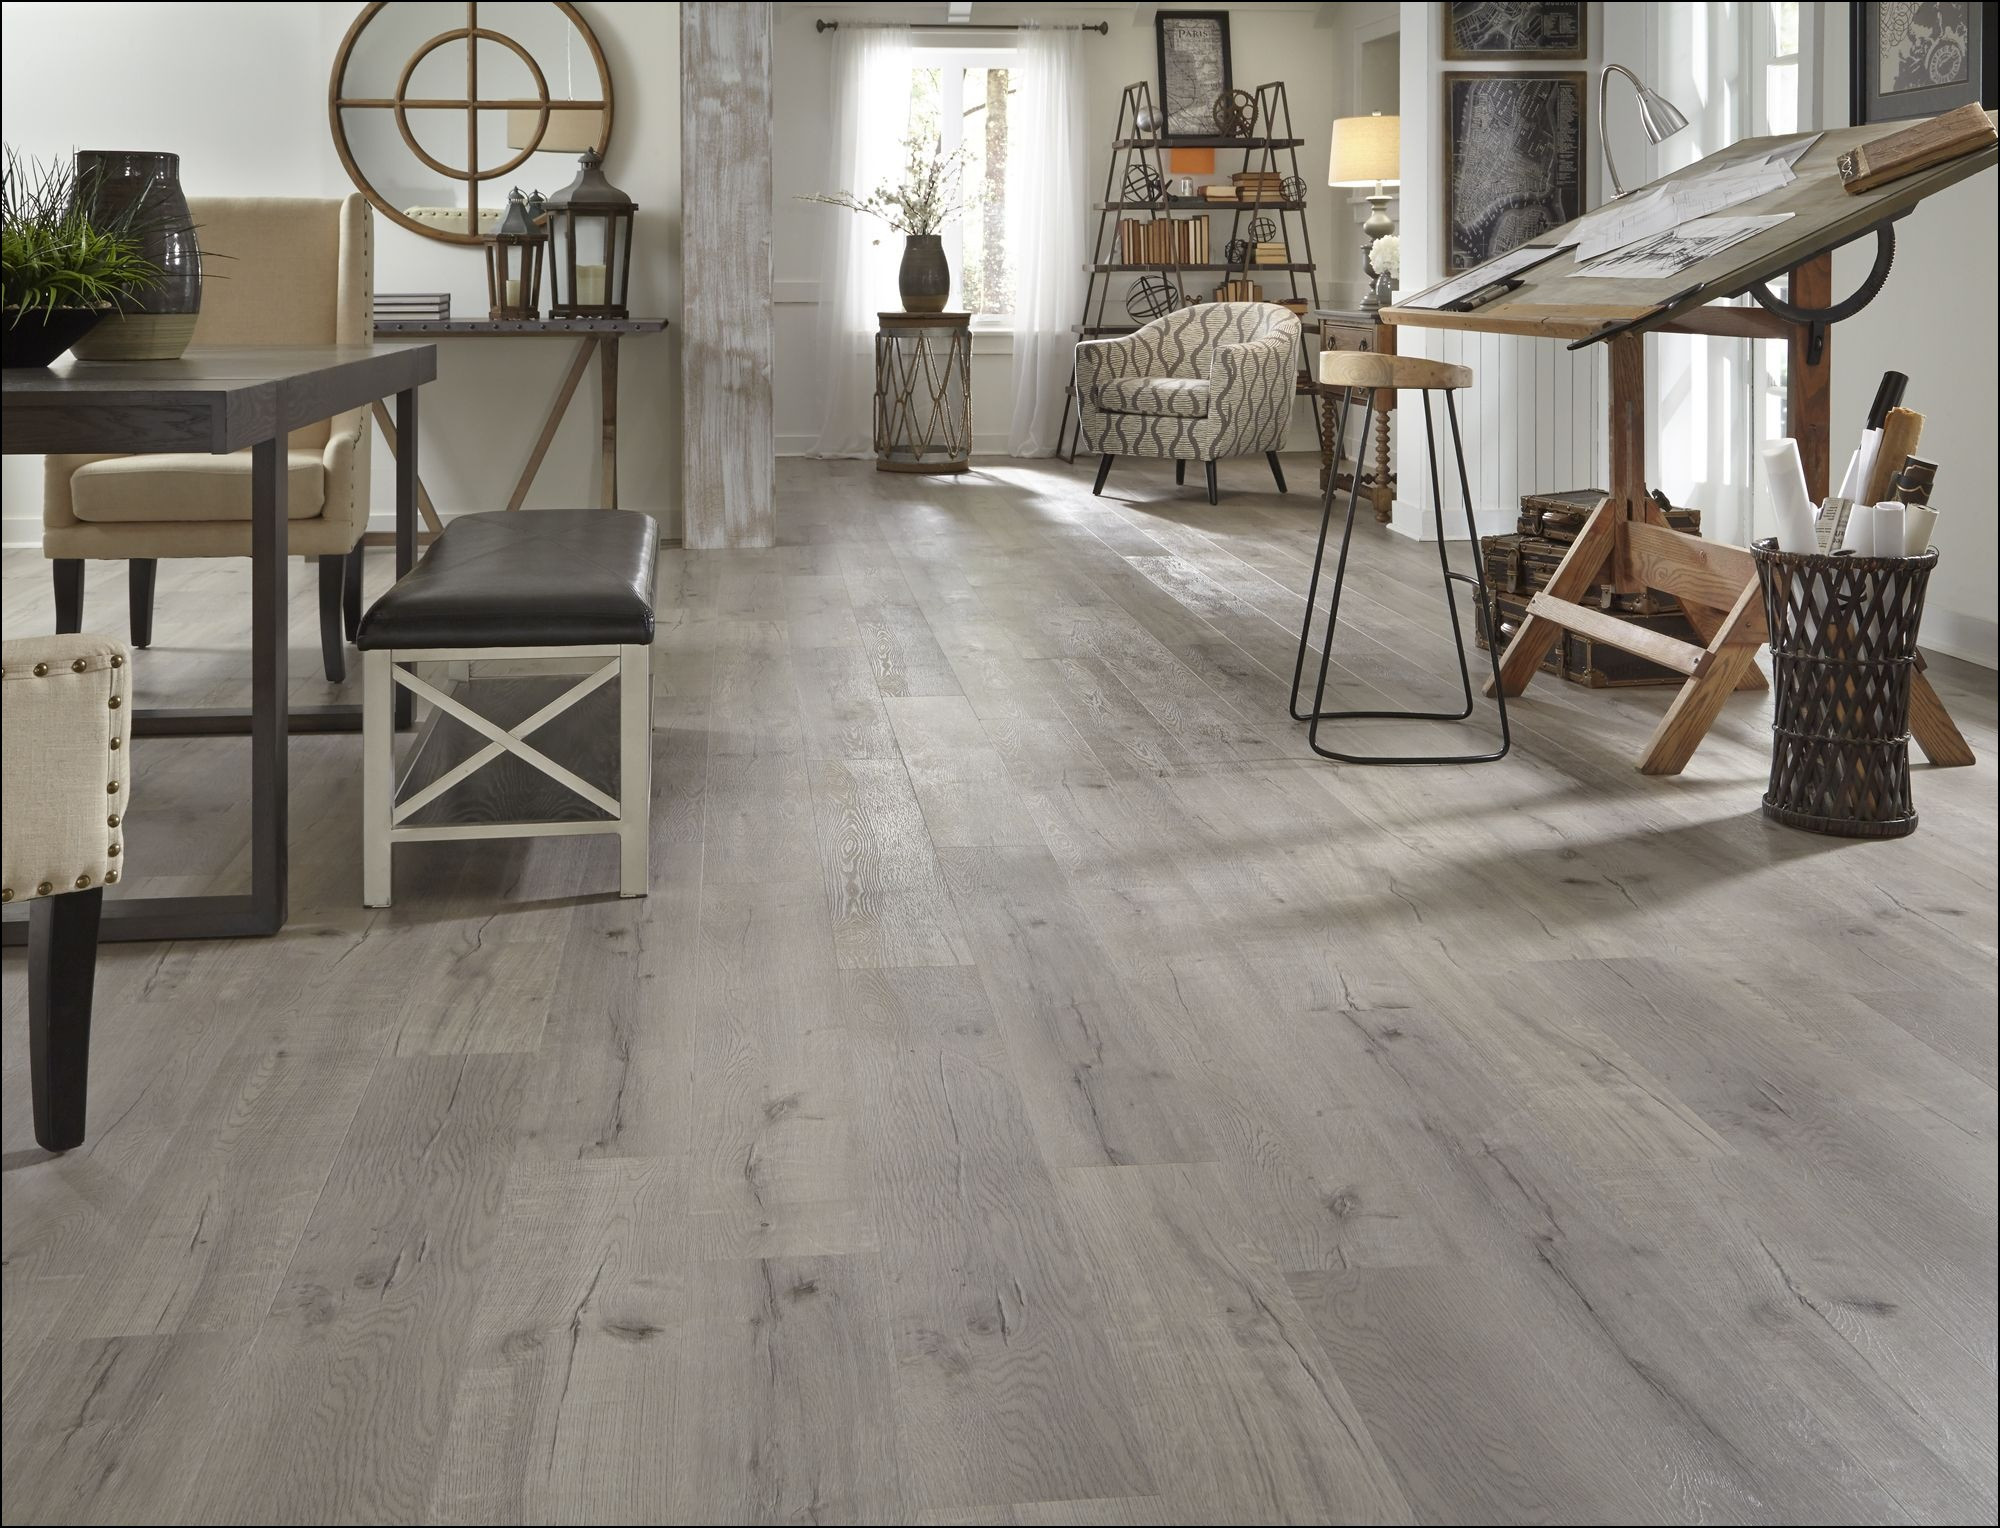 18 Unique Kahrs Engineered Hardwood Flooring Reviews 2023 free download kahrs engineered hardwood flooring reviews of hardwood flooring suppliers france flooring ideas regarding hardwood flooring pictures in homes collection this fall flooring season see 100 new